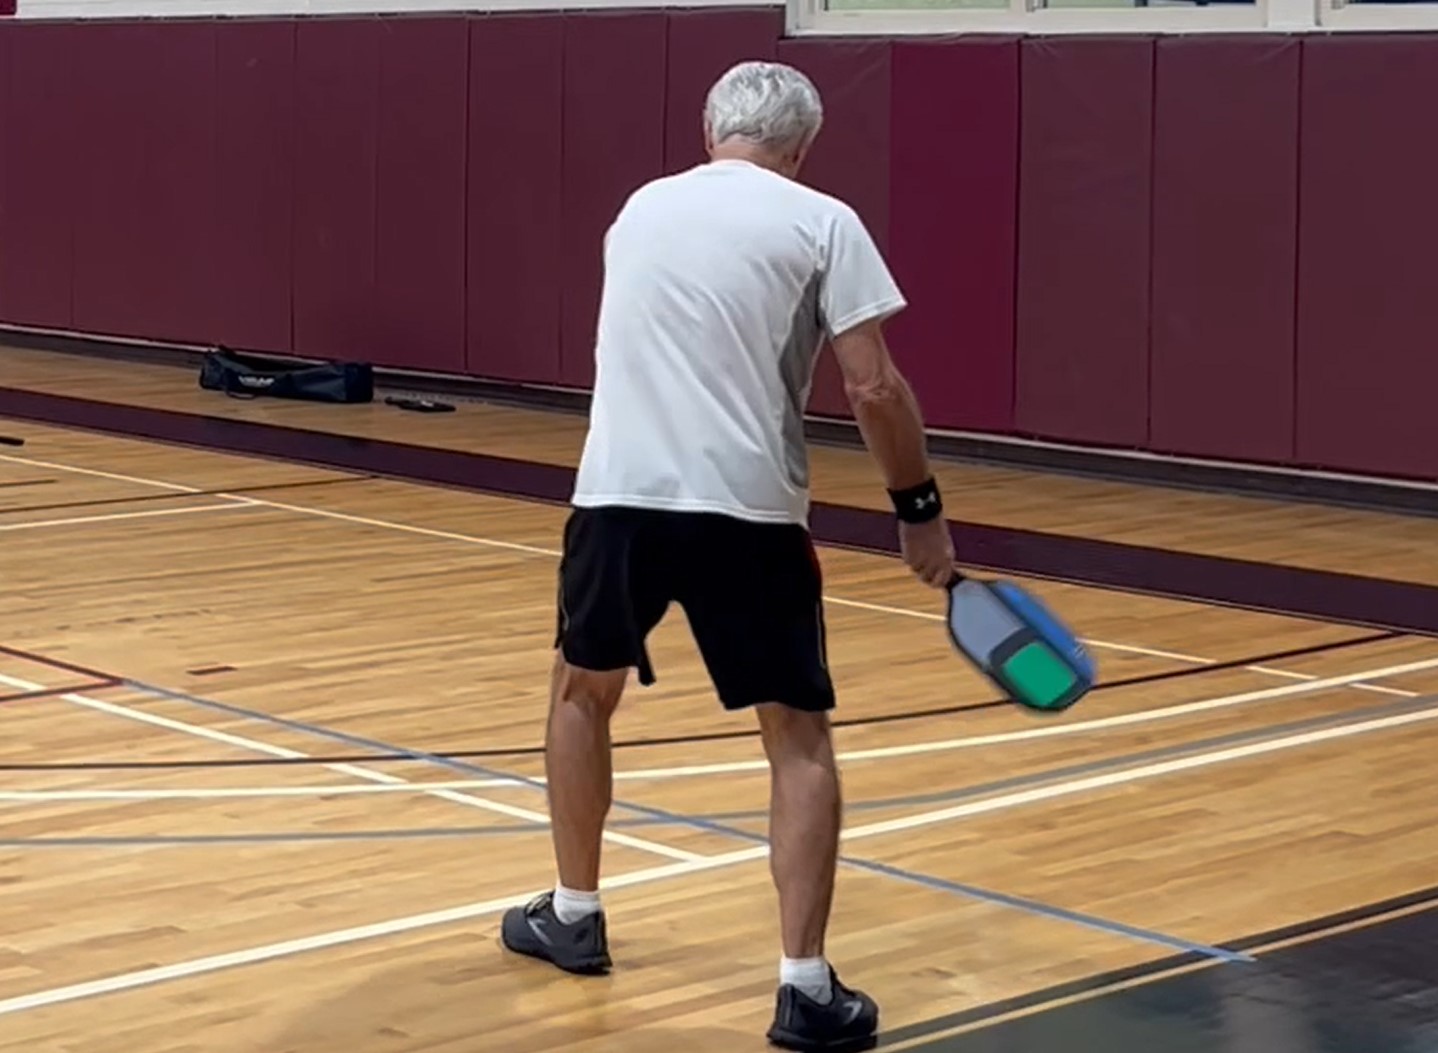 How to Serve in Pickleball: Tips and Techniques for Success